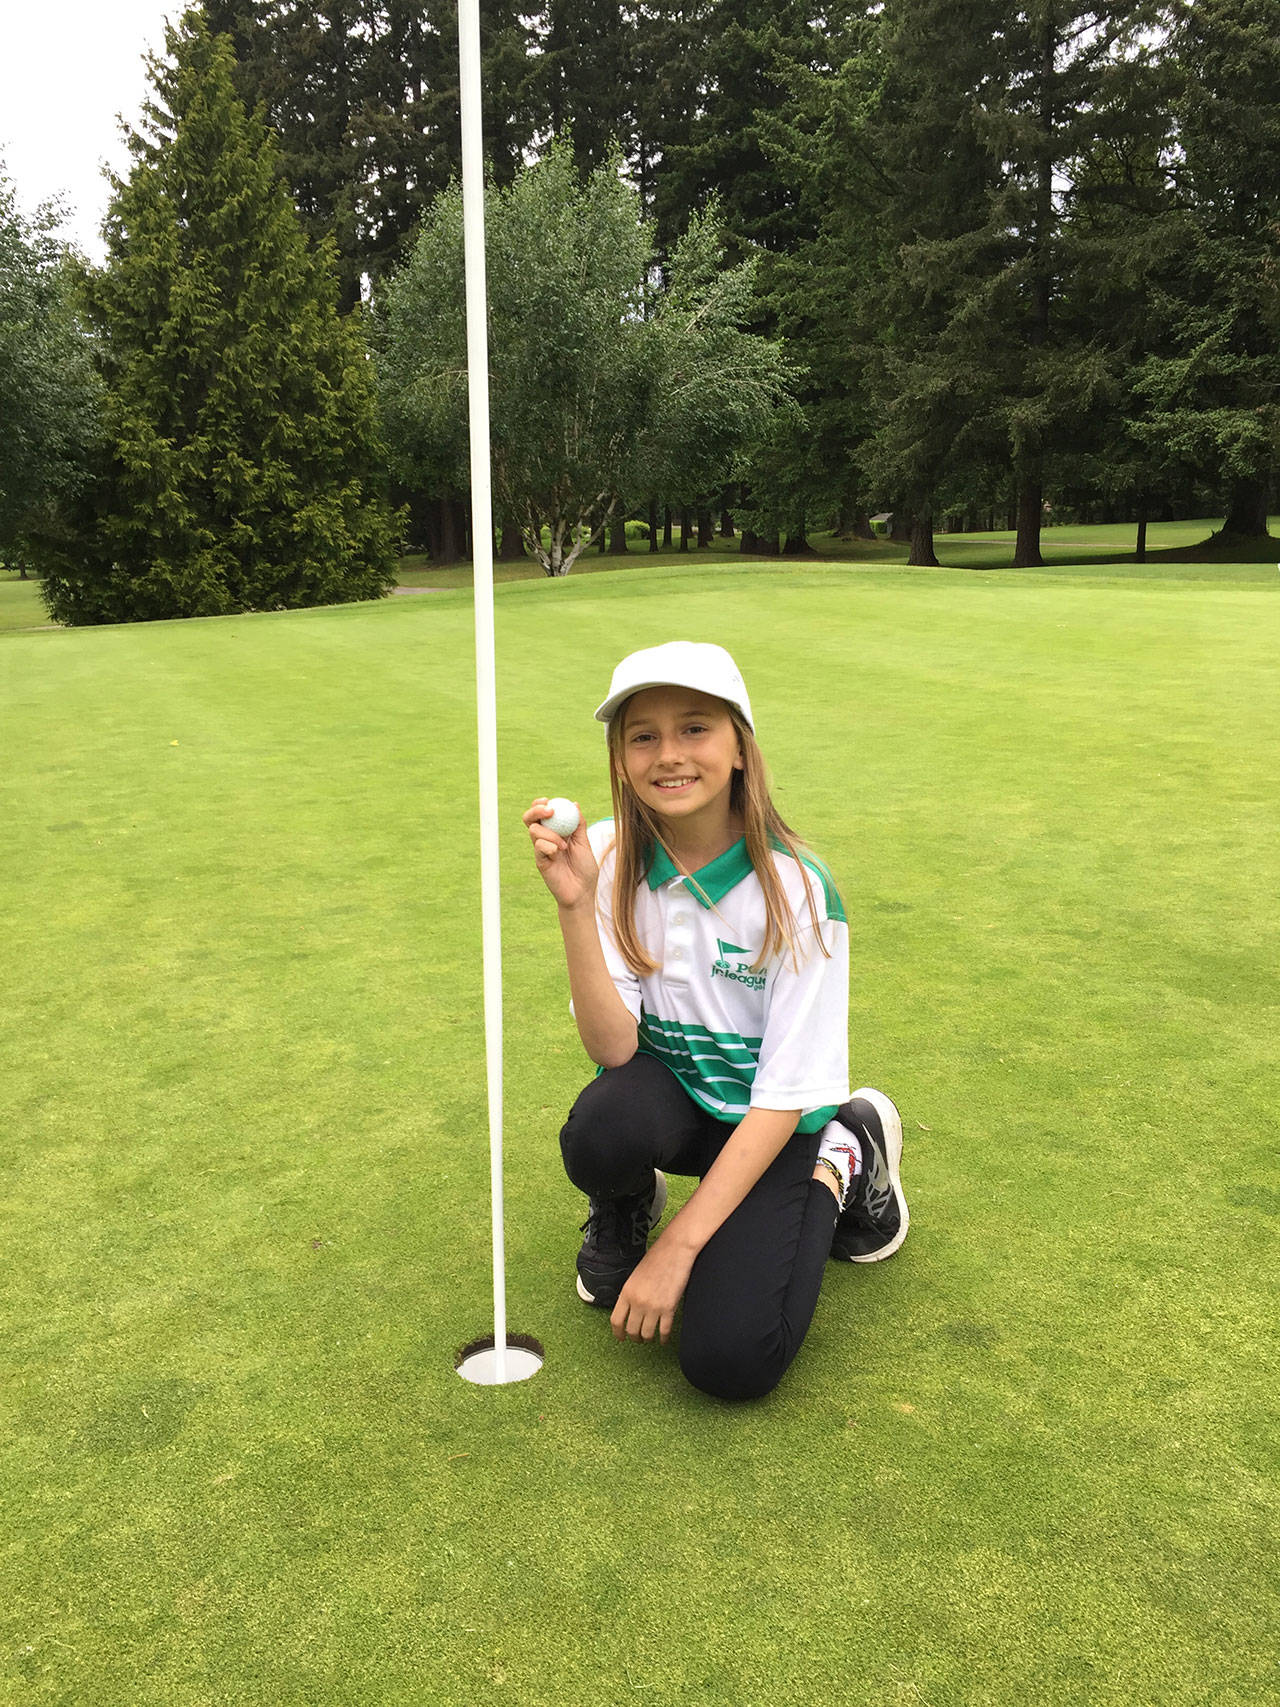 Kent’s Maya Hanson hit a hole-in-one in her first ever round of golf during recent league play at Meridian Valley. COURTESY